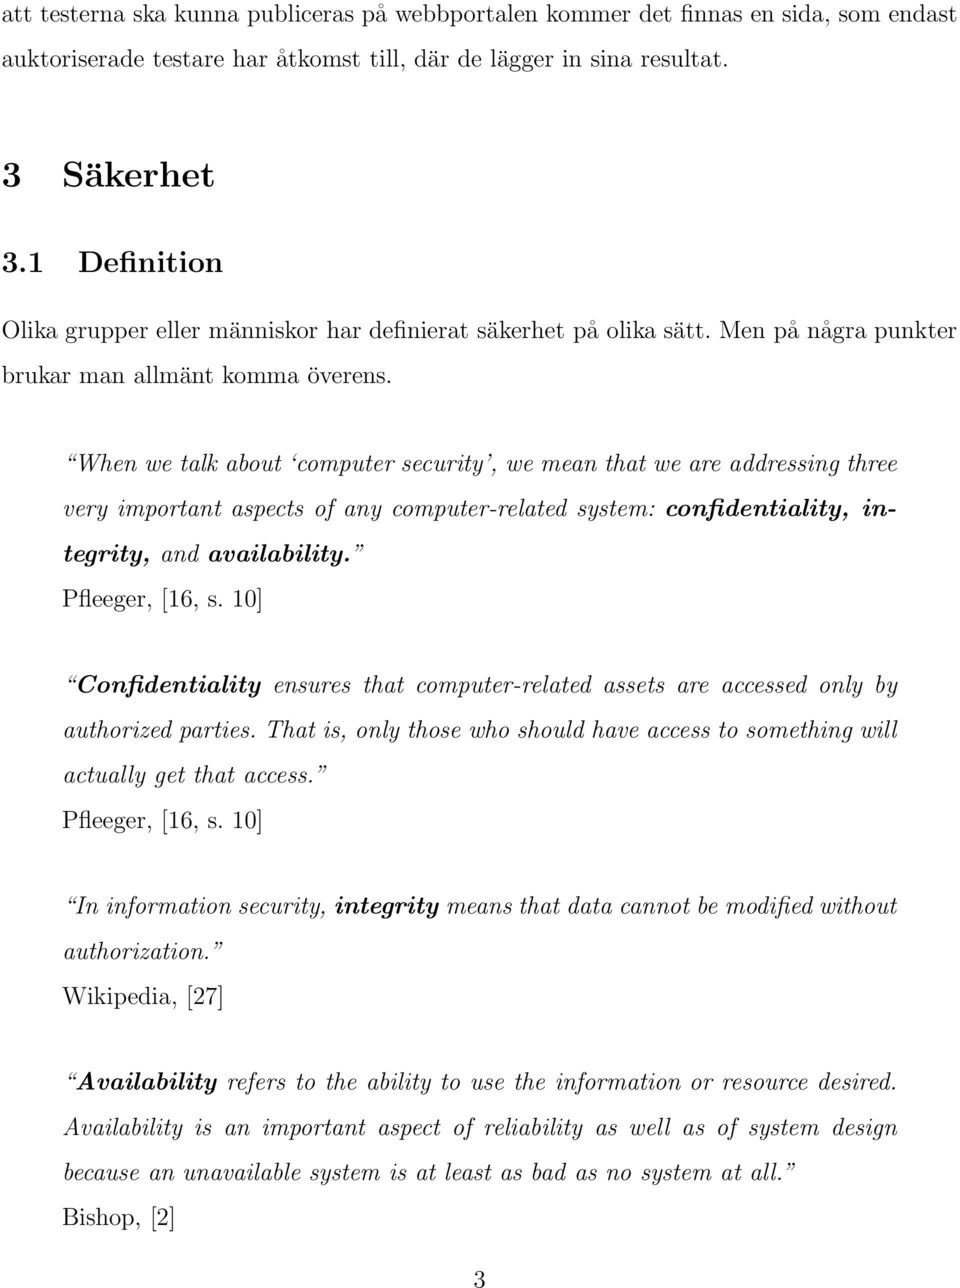 When we talk about computer security, we mean that we are addressing three very important aspects of any computer-related system: confidentiality, integrity, and availability. Pfleeger, [16, s.